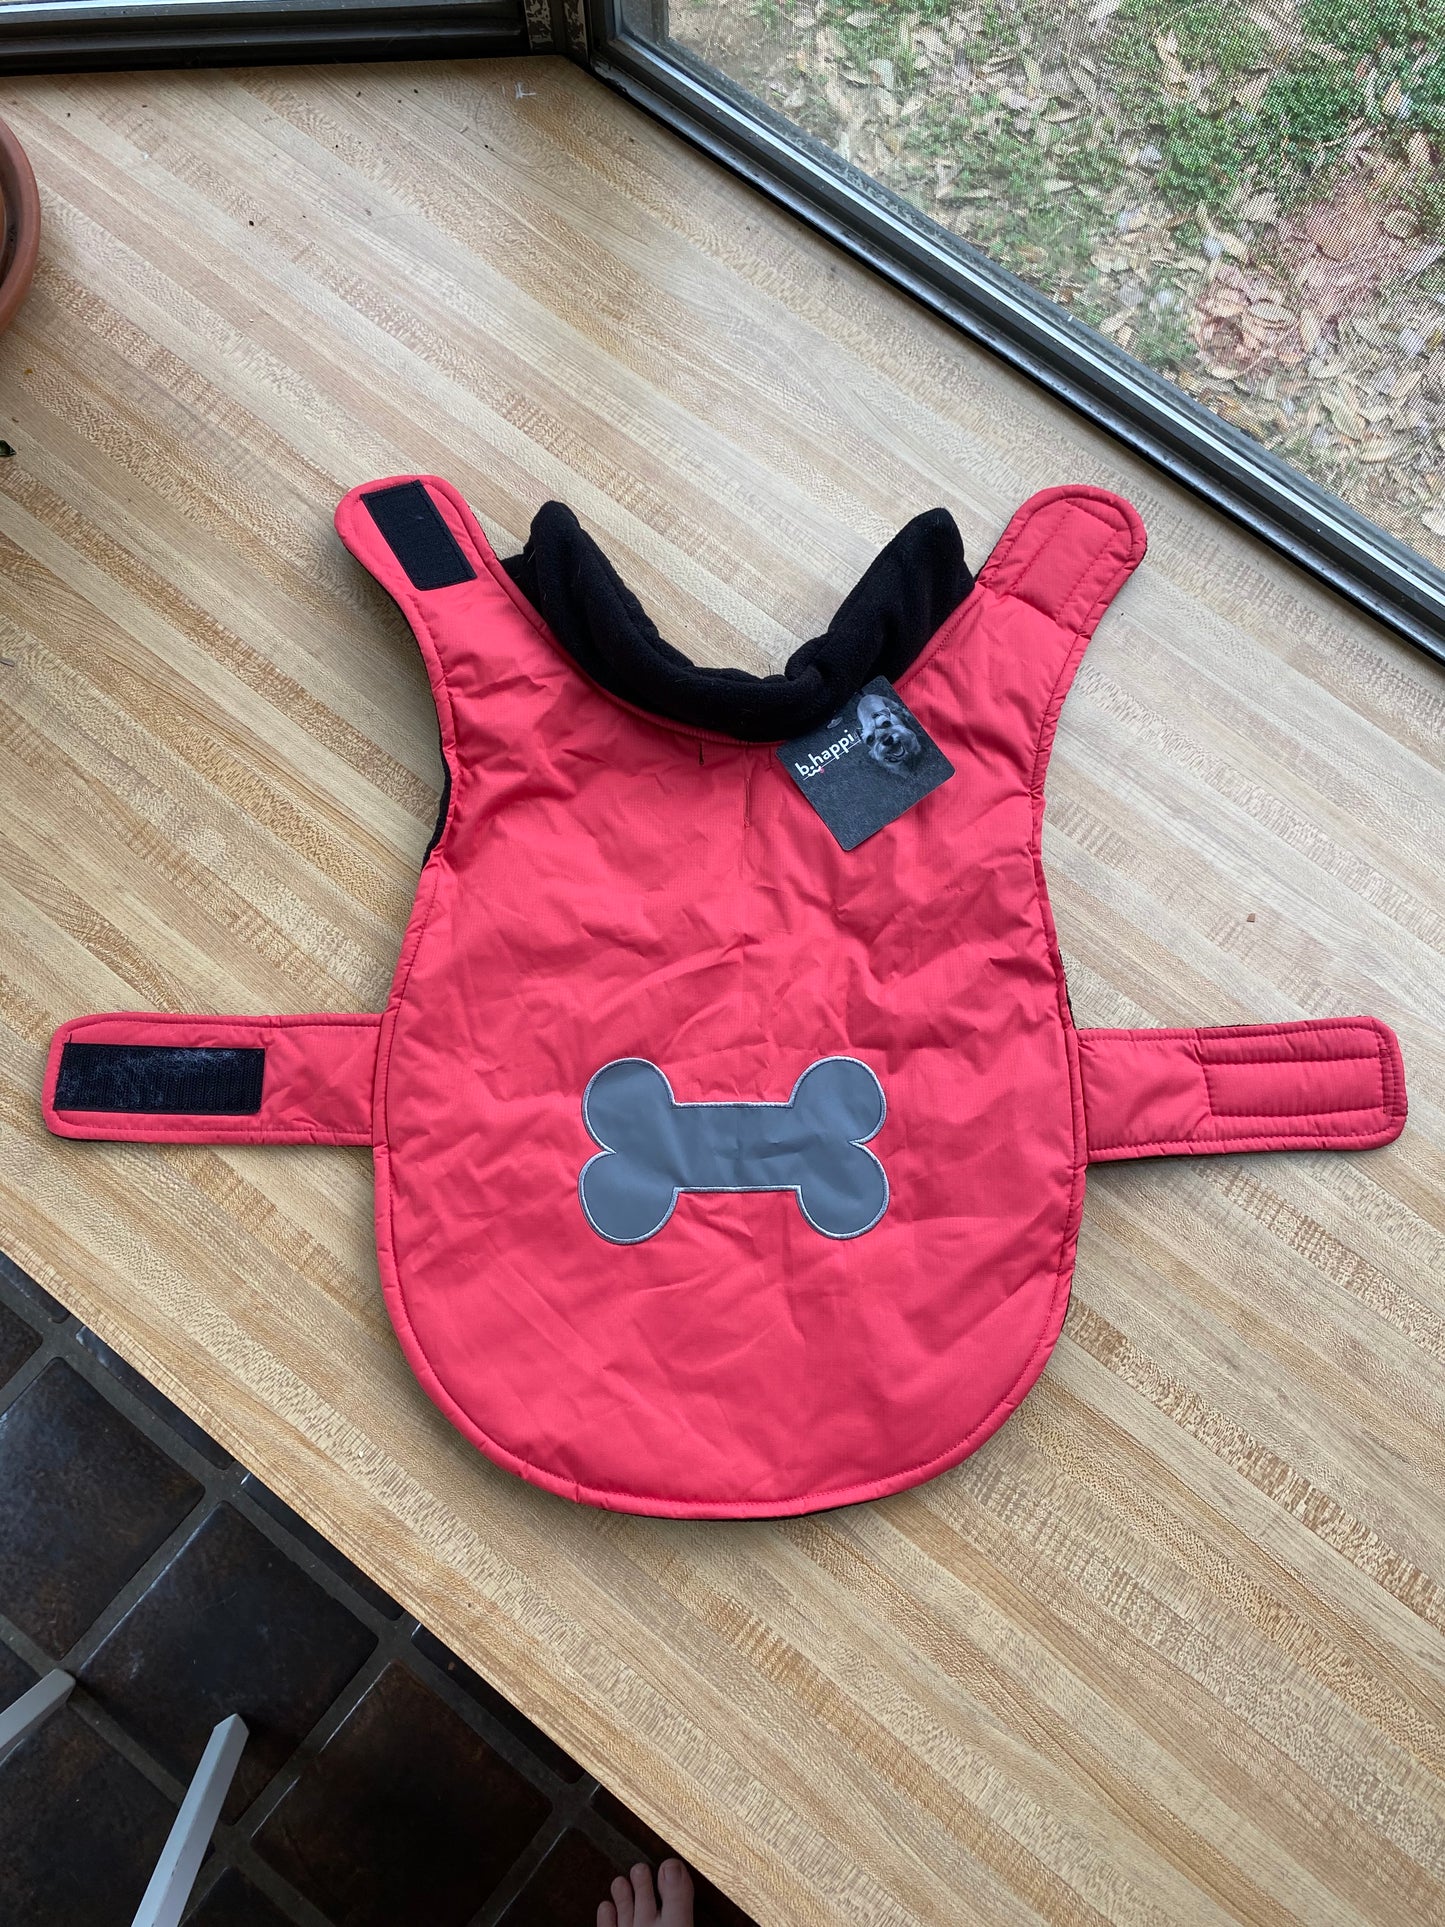 Dog Winter Jacket ~ Up to 35lbs